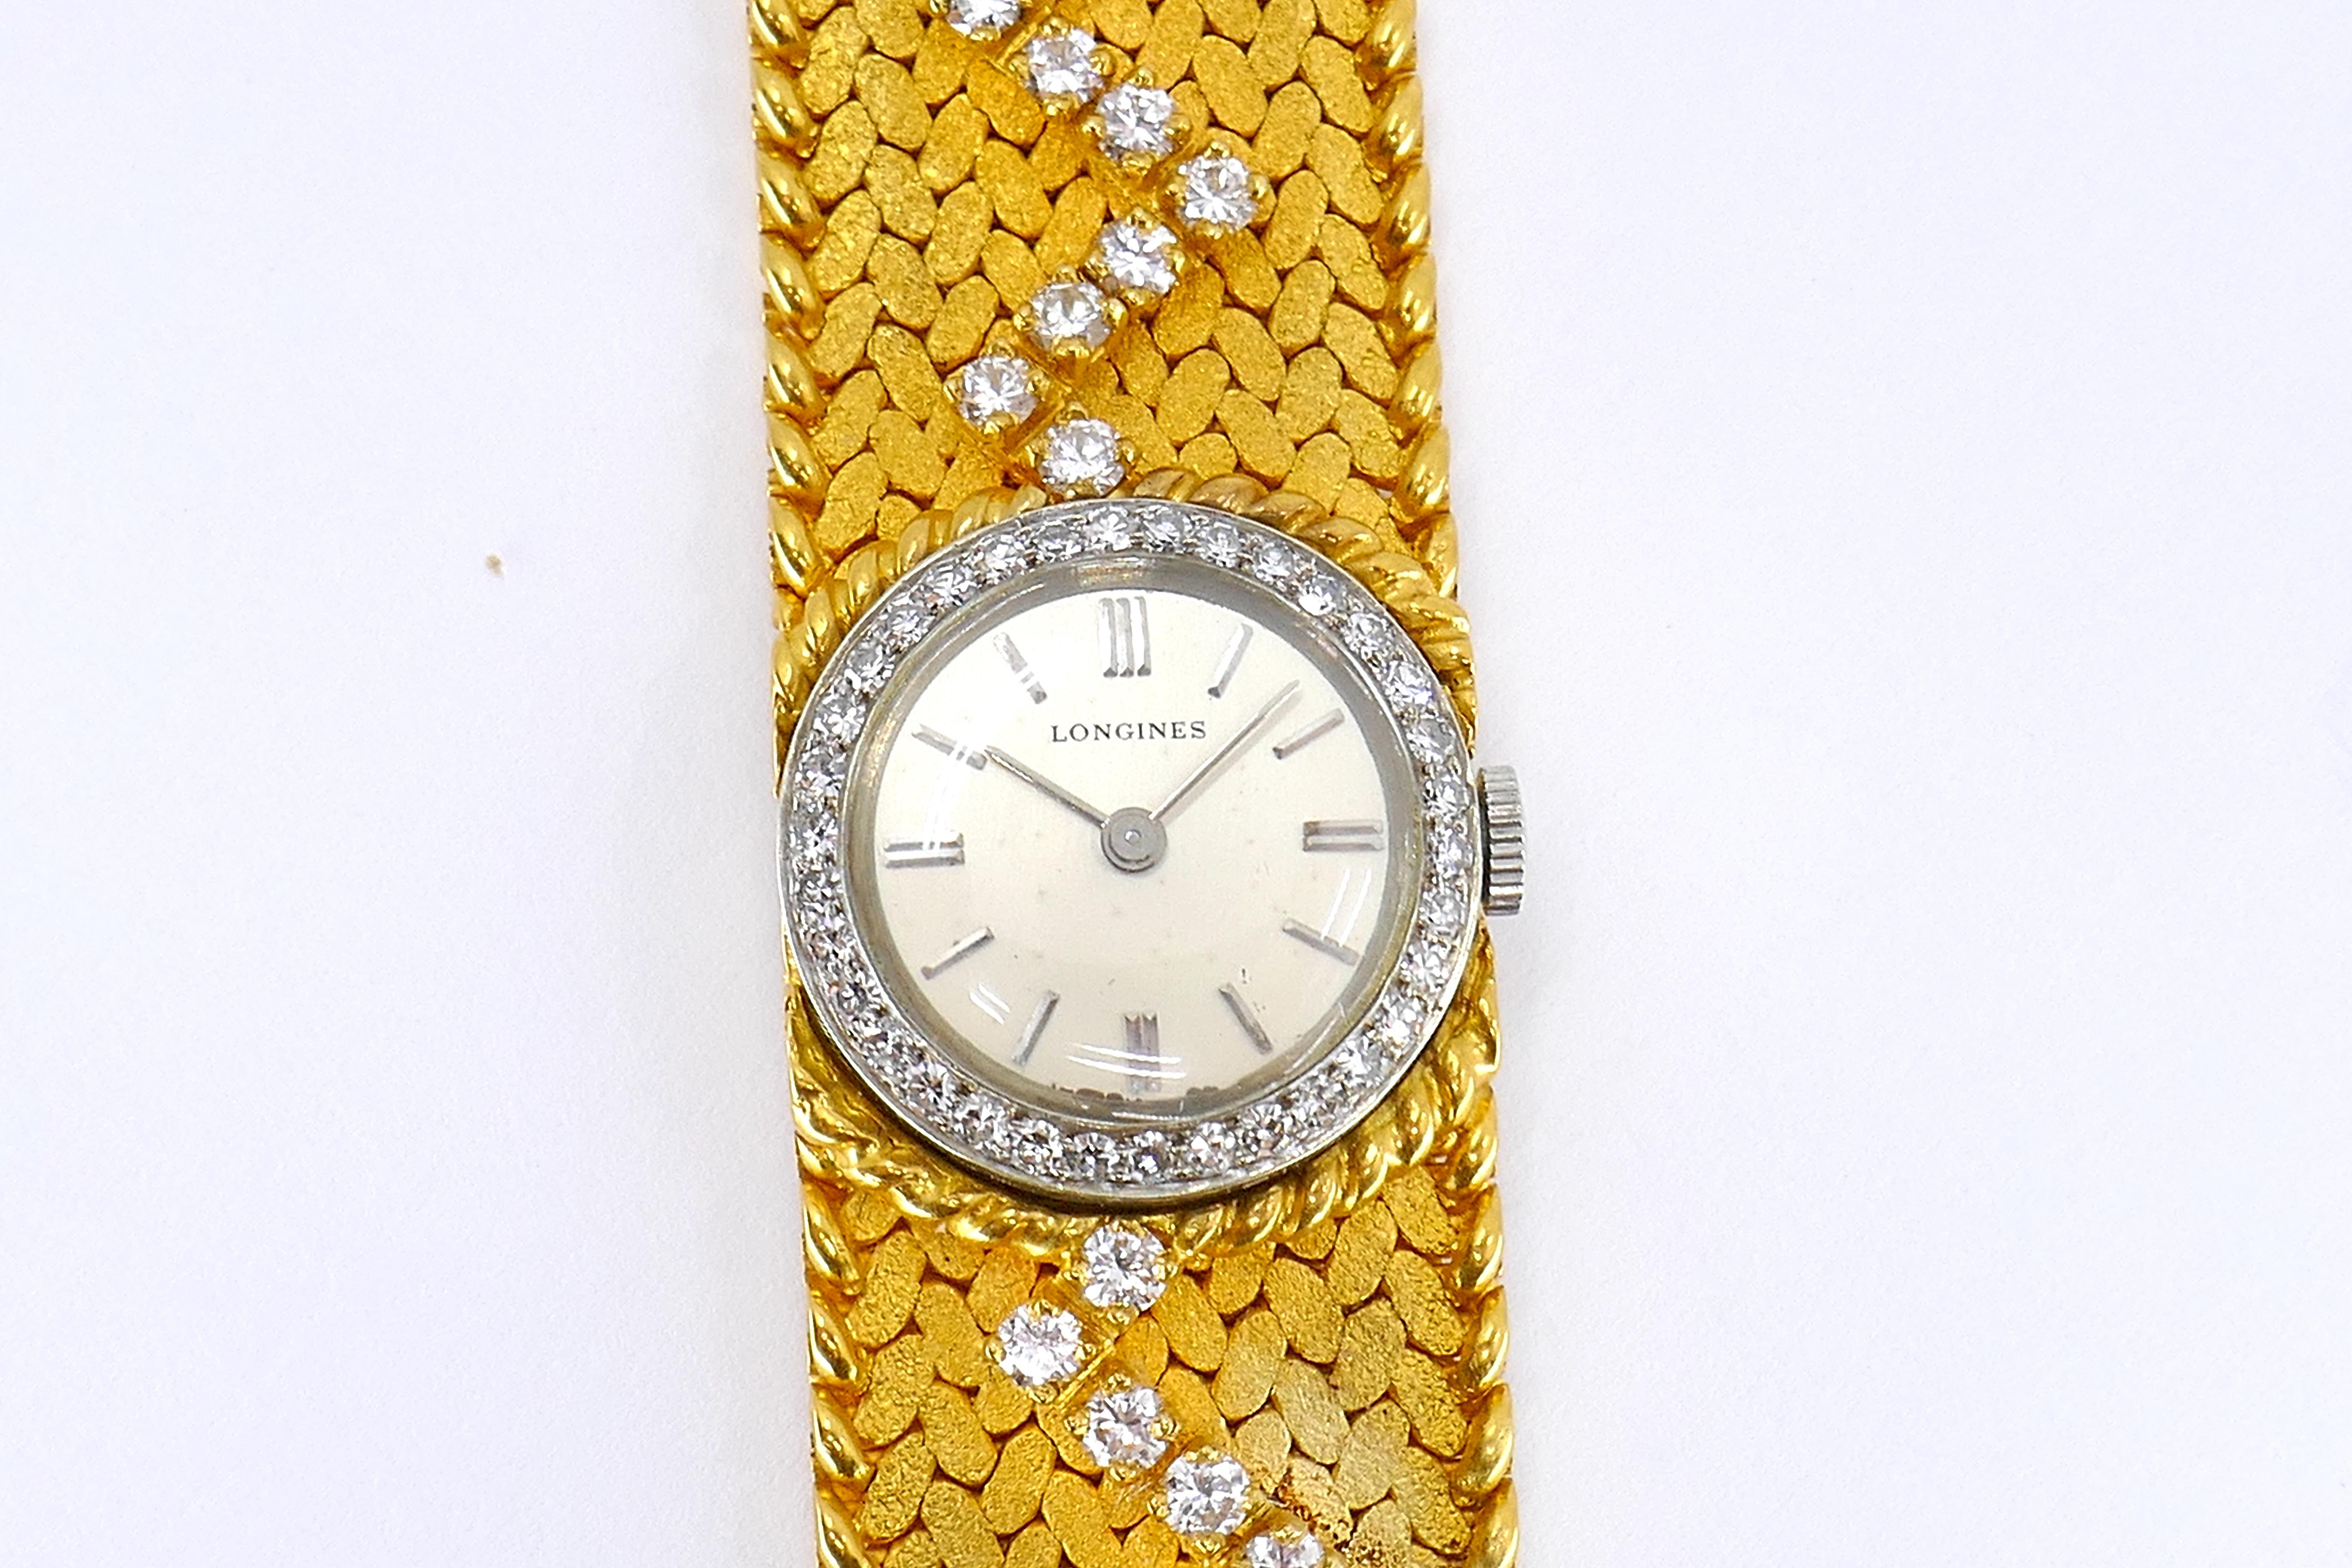 Vintage Cartier 18k Gold Diamond Braided Watch For Sale 1